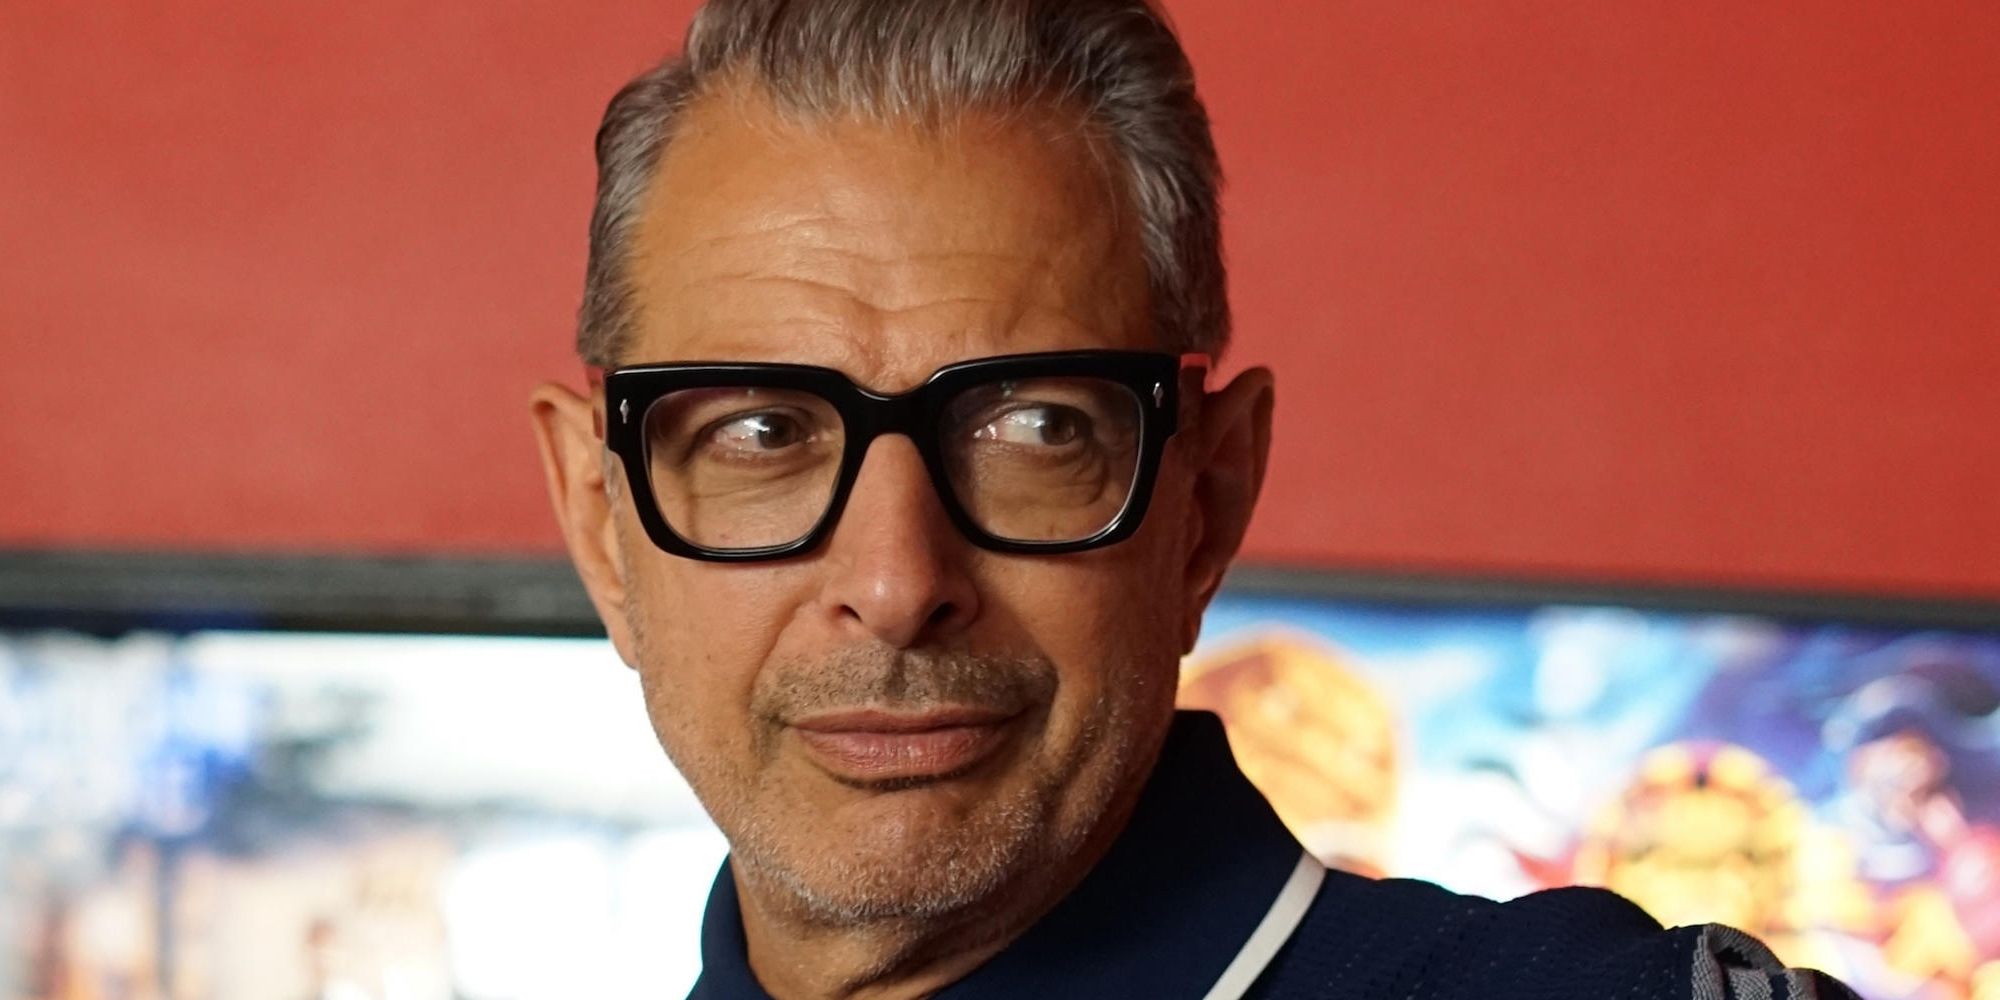 An image of Jeff Goldblum smiling at someone off-screen in the World According To Jeff Goldblum